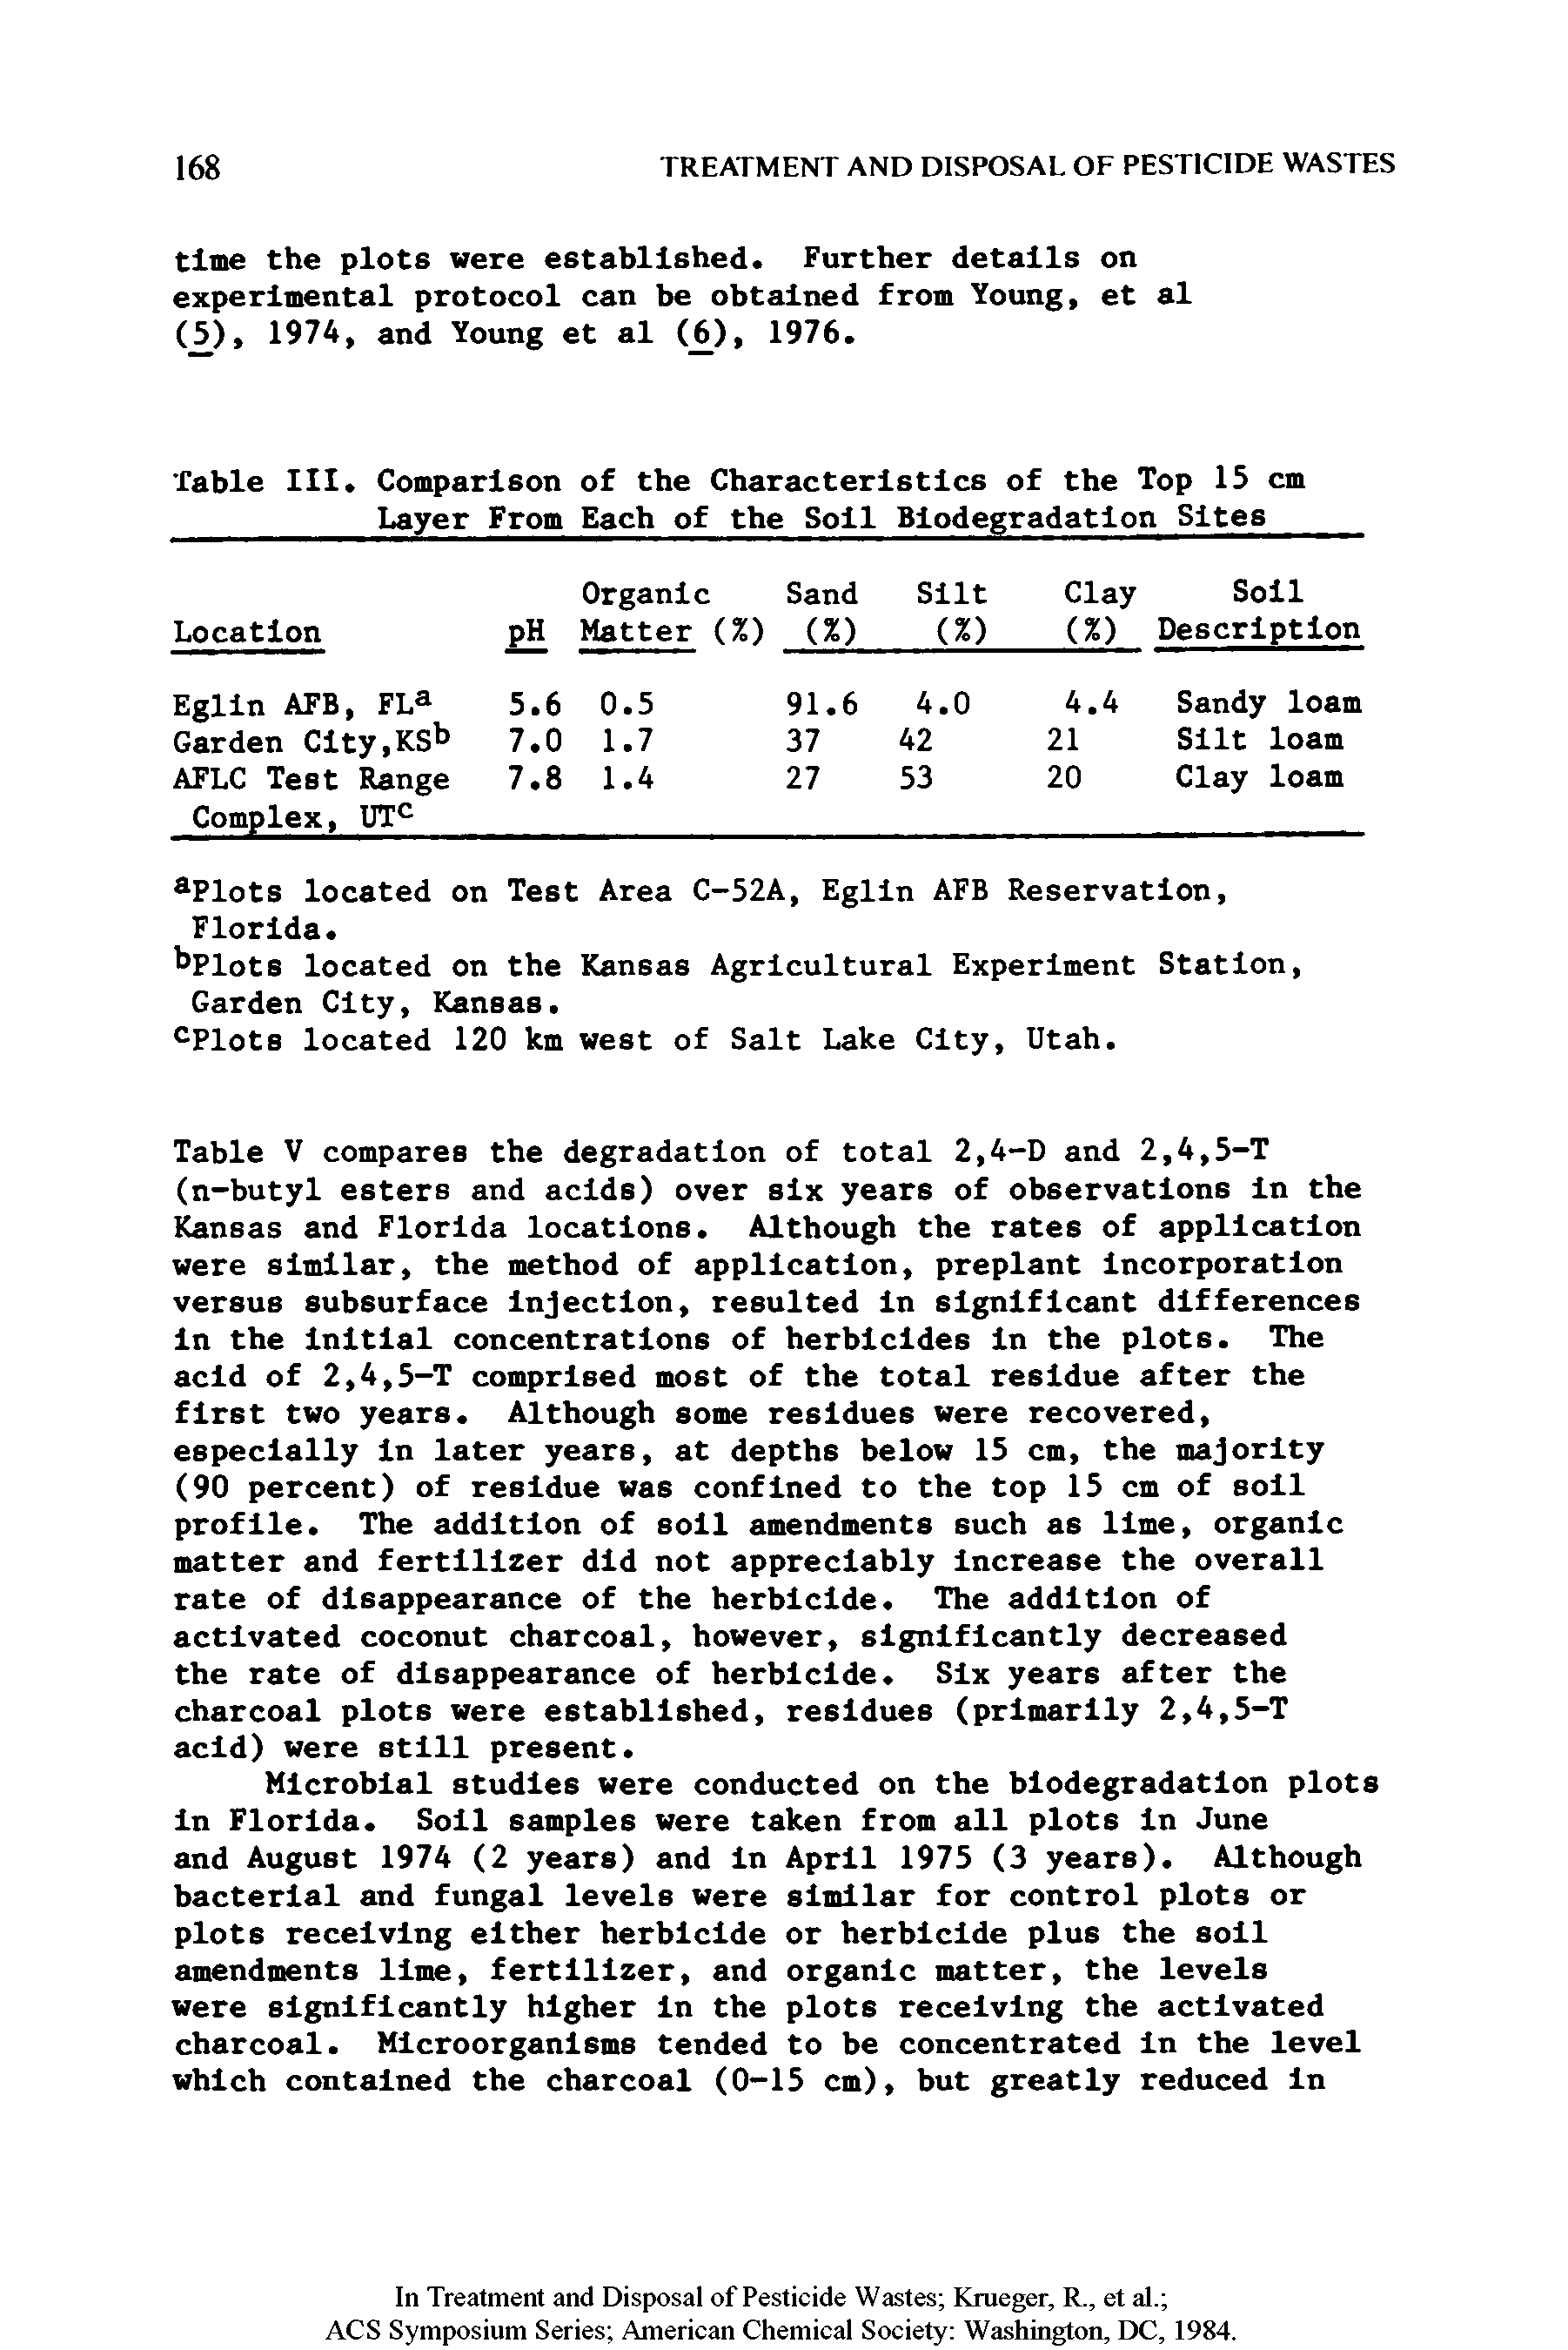 Table V compares the degradation of total 2,4-D and 2,4,5-T (n-butyl esters and acids) over six years of observations In the Kansas and Florida locations. Although the rates of application were similar, the method of application, preplant Incorporation versus subsurface Injection, resulted In significant differences In the Initial concentrations of herbicides In the plots. The acid of 2,4,5-T comprised most of the total residue after the first two years. Although some residues were recovered, especially In later years, at depths below 15 cm, the majority (90 percent) of residue was confined to the top 15 cm of soil profile. The addition of soil amendments such as lime, organic matter and fertilizer did not appreciably Increase the overall rate of disappearance of the herbicide. The addition of activated coconut charcoal, however, significantly decreased the rate of disappearance of herbicide. Six years after the charcoal plots were established, residues (primarily 2,4,5-T acid) were still present.